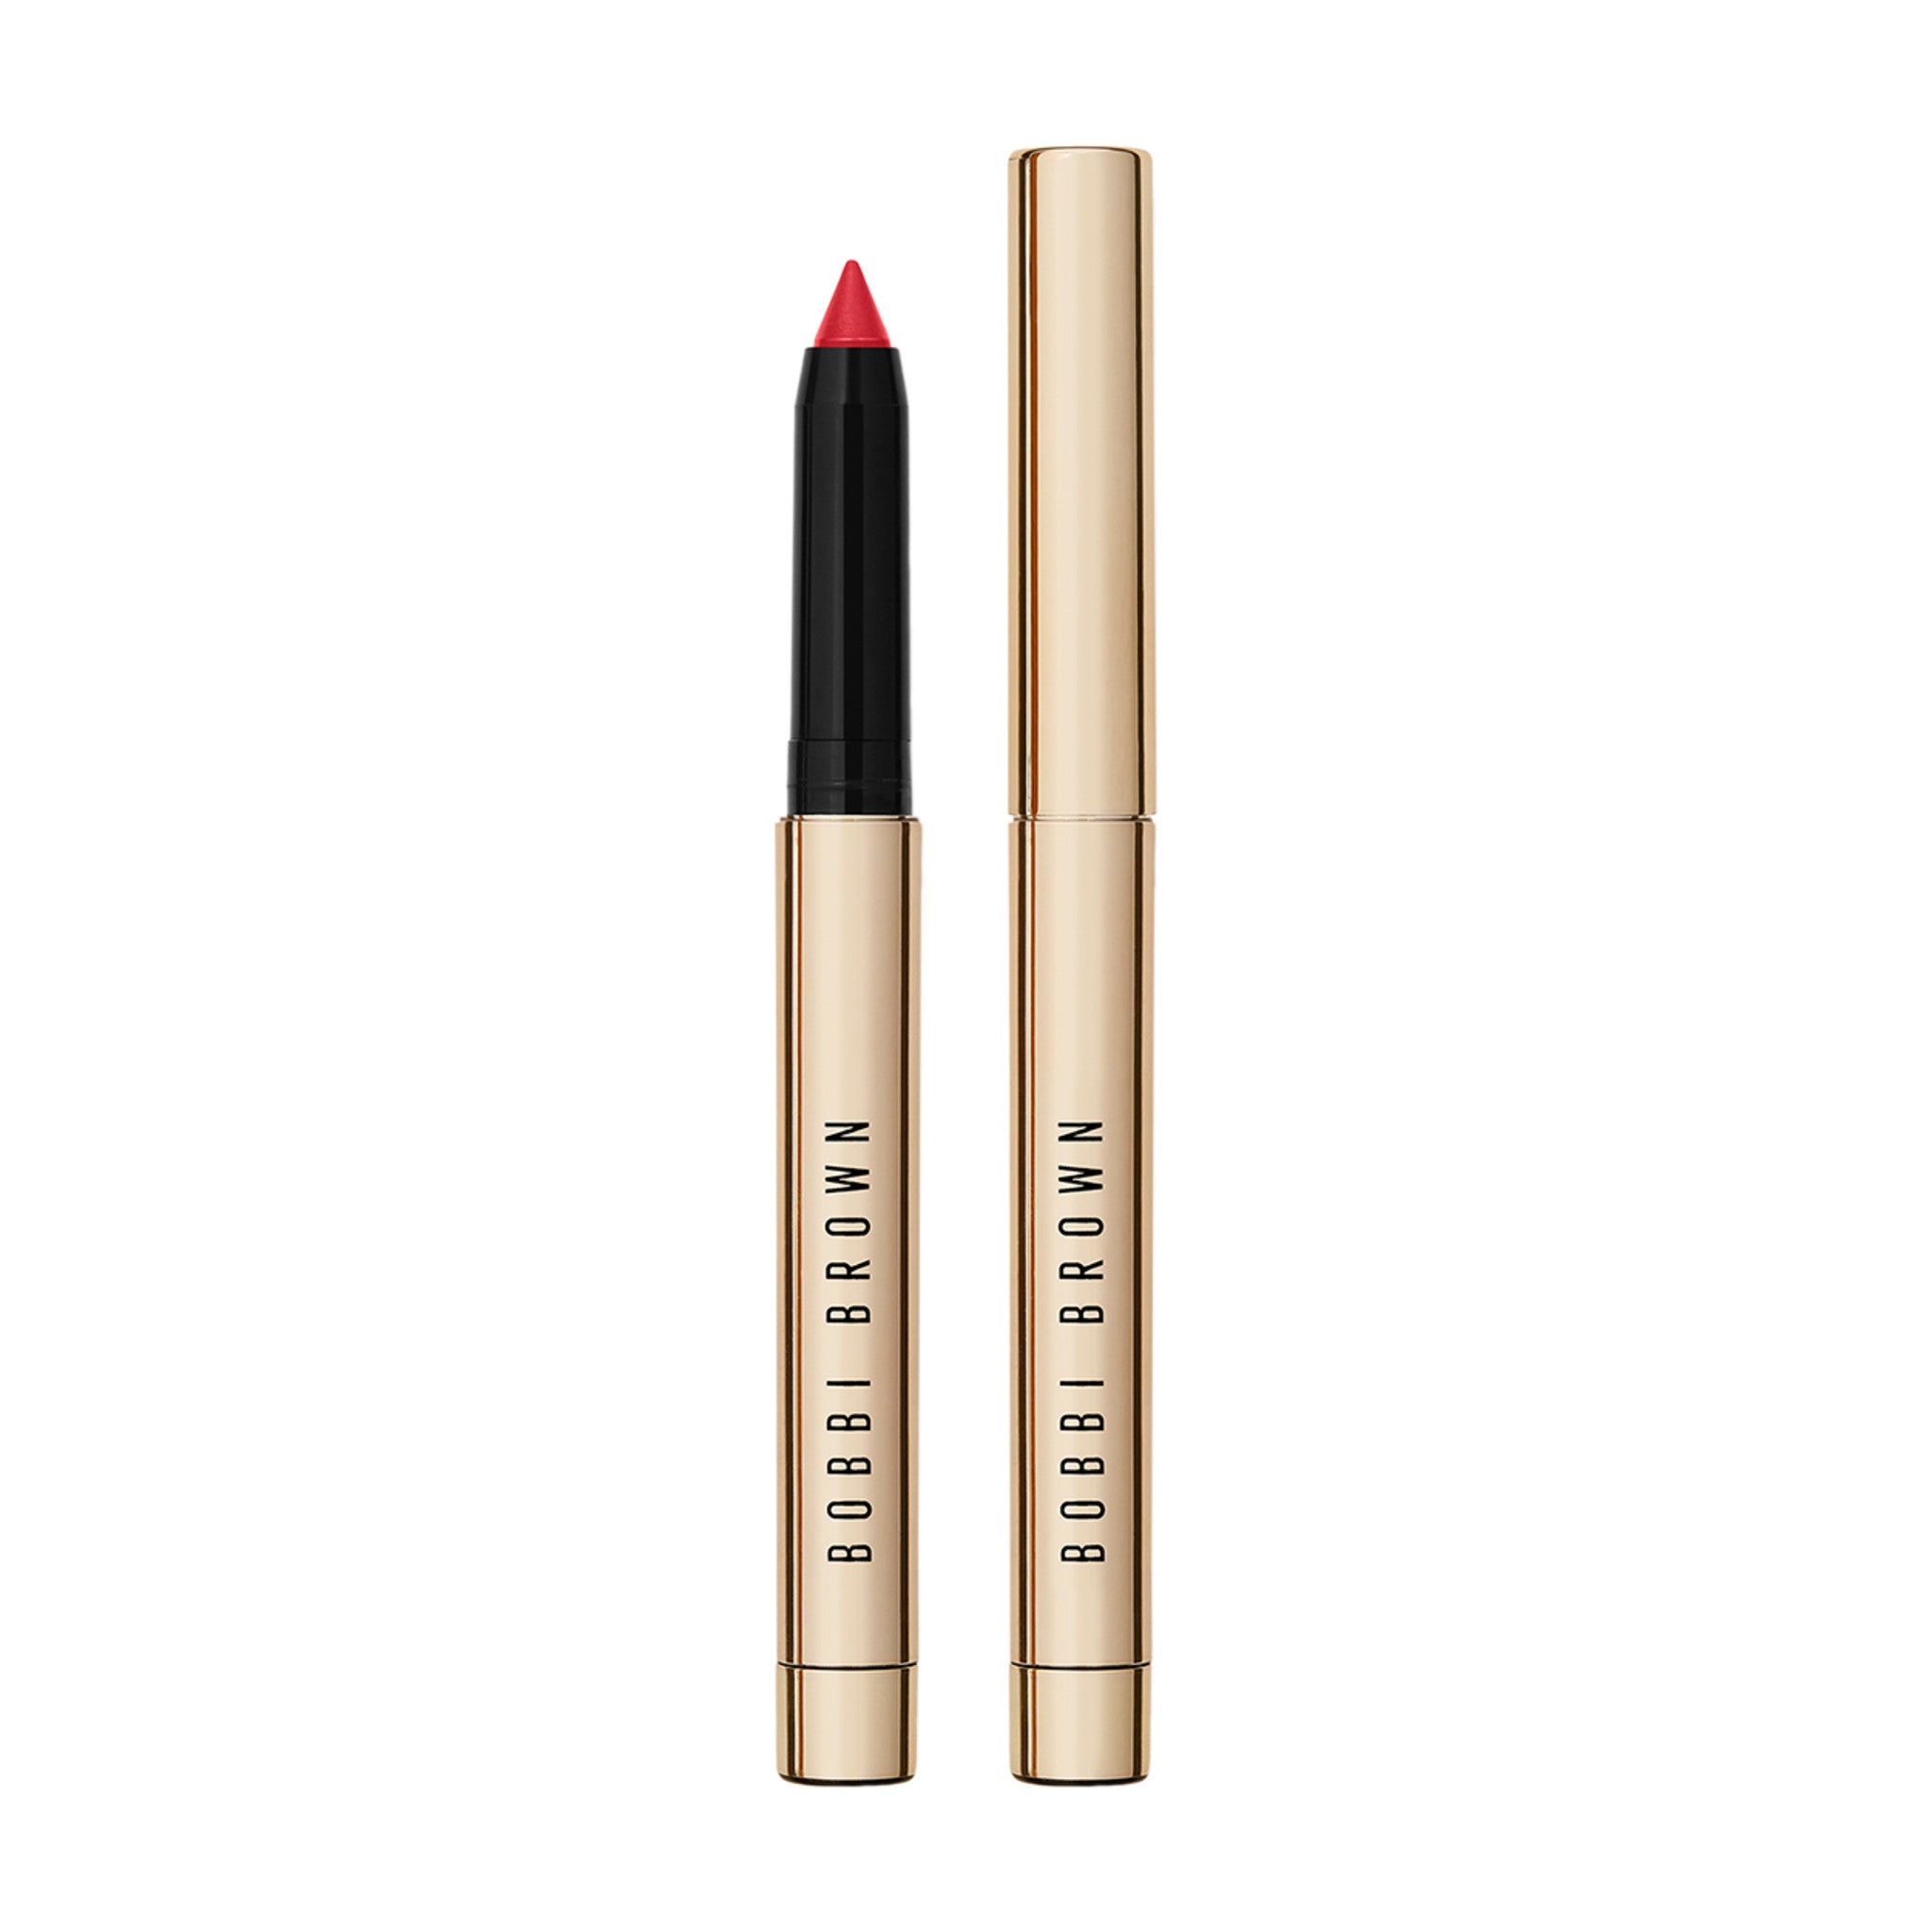 Bobbi Brown Luxe Defining Lipstick Color/Shade variant: Redefined main image. This product is in the color red